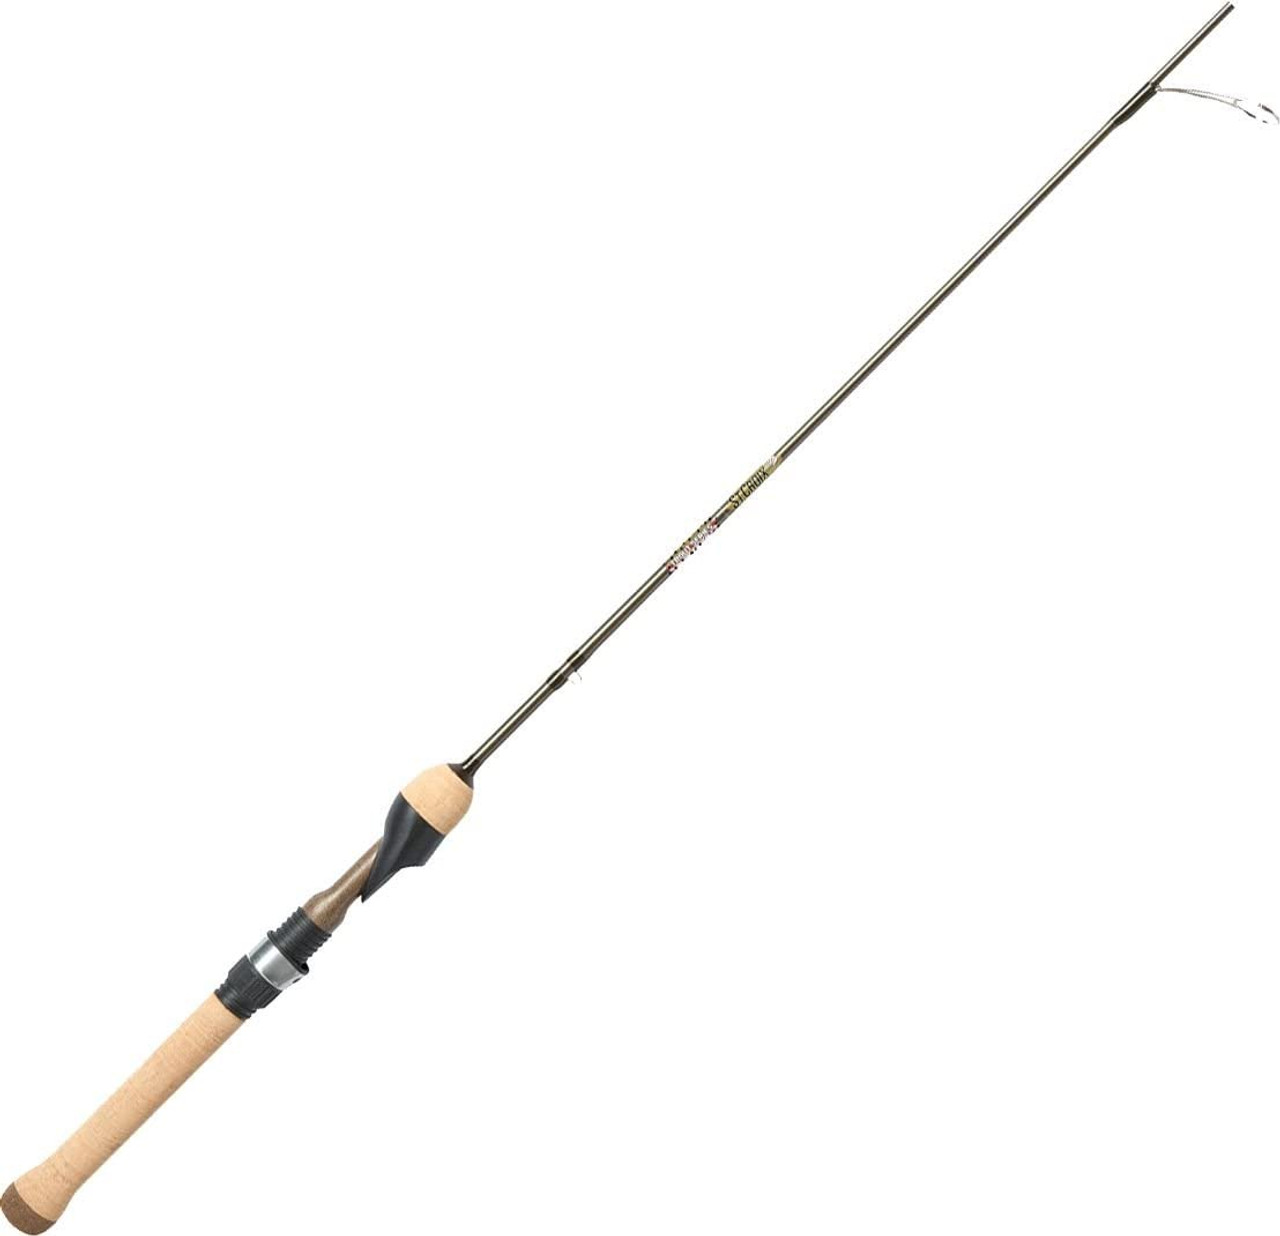 St. Croix Rods Trout Series Spinning Rod 6 ft 6 in